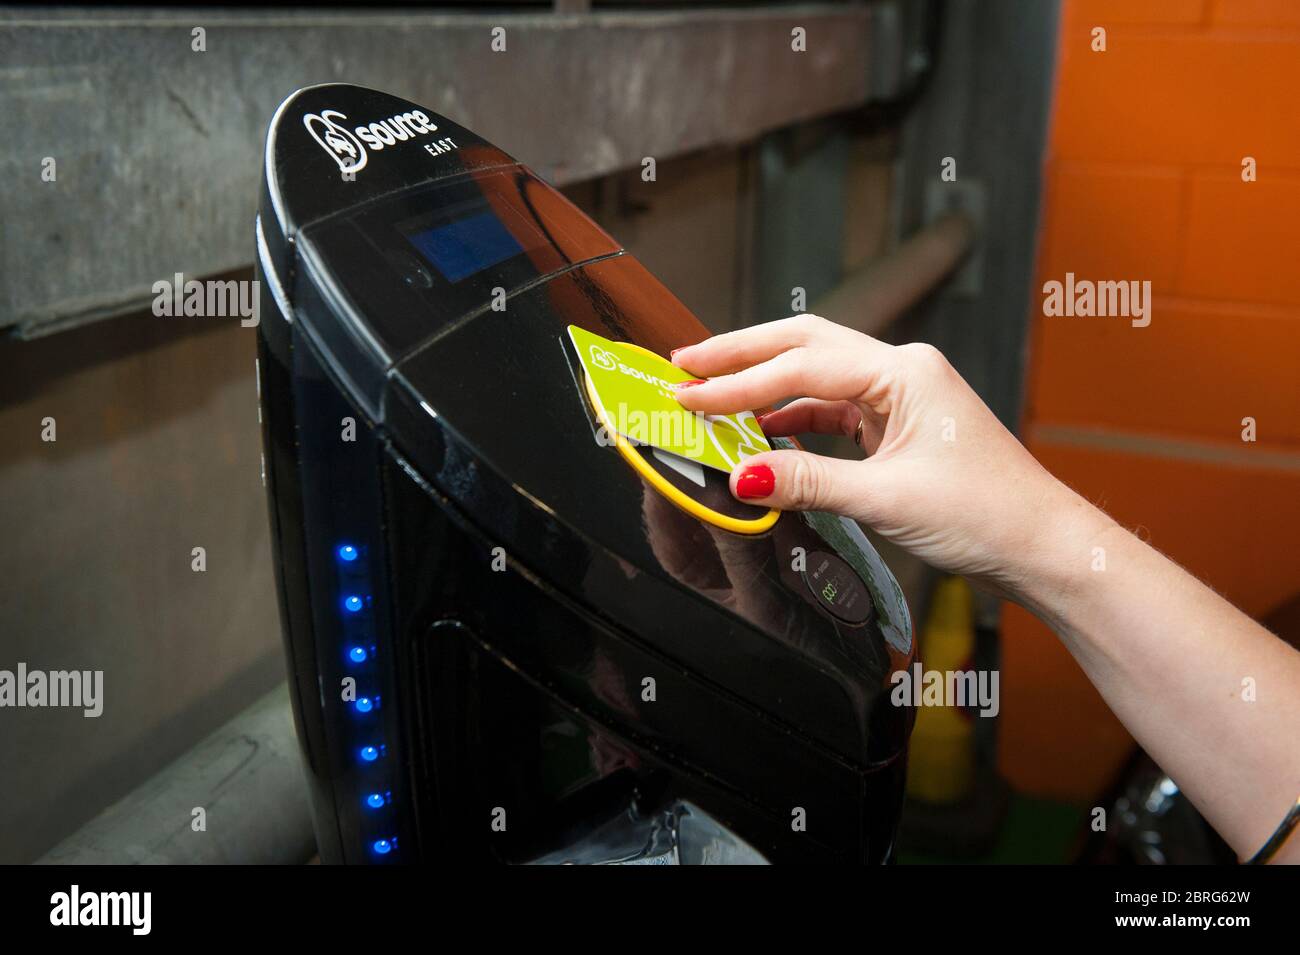 Using a Source East contactless smart card at an electric car charging point in the UK. Stock Photo